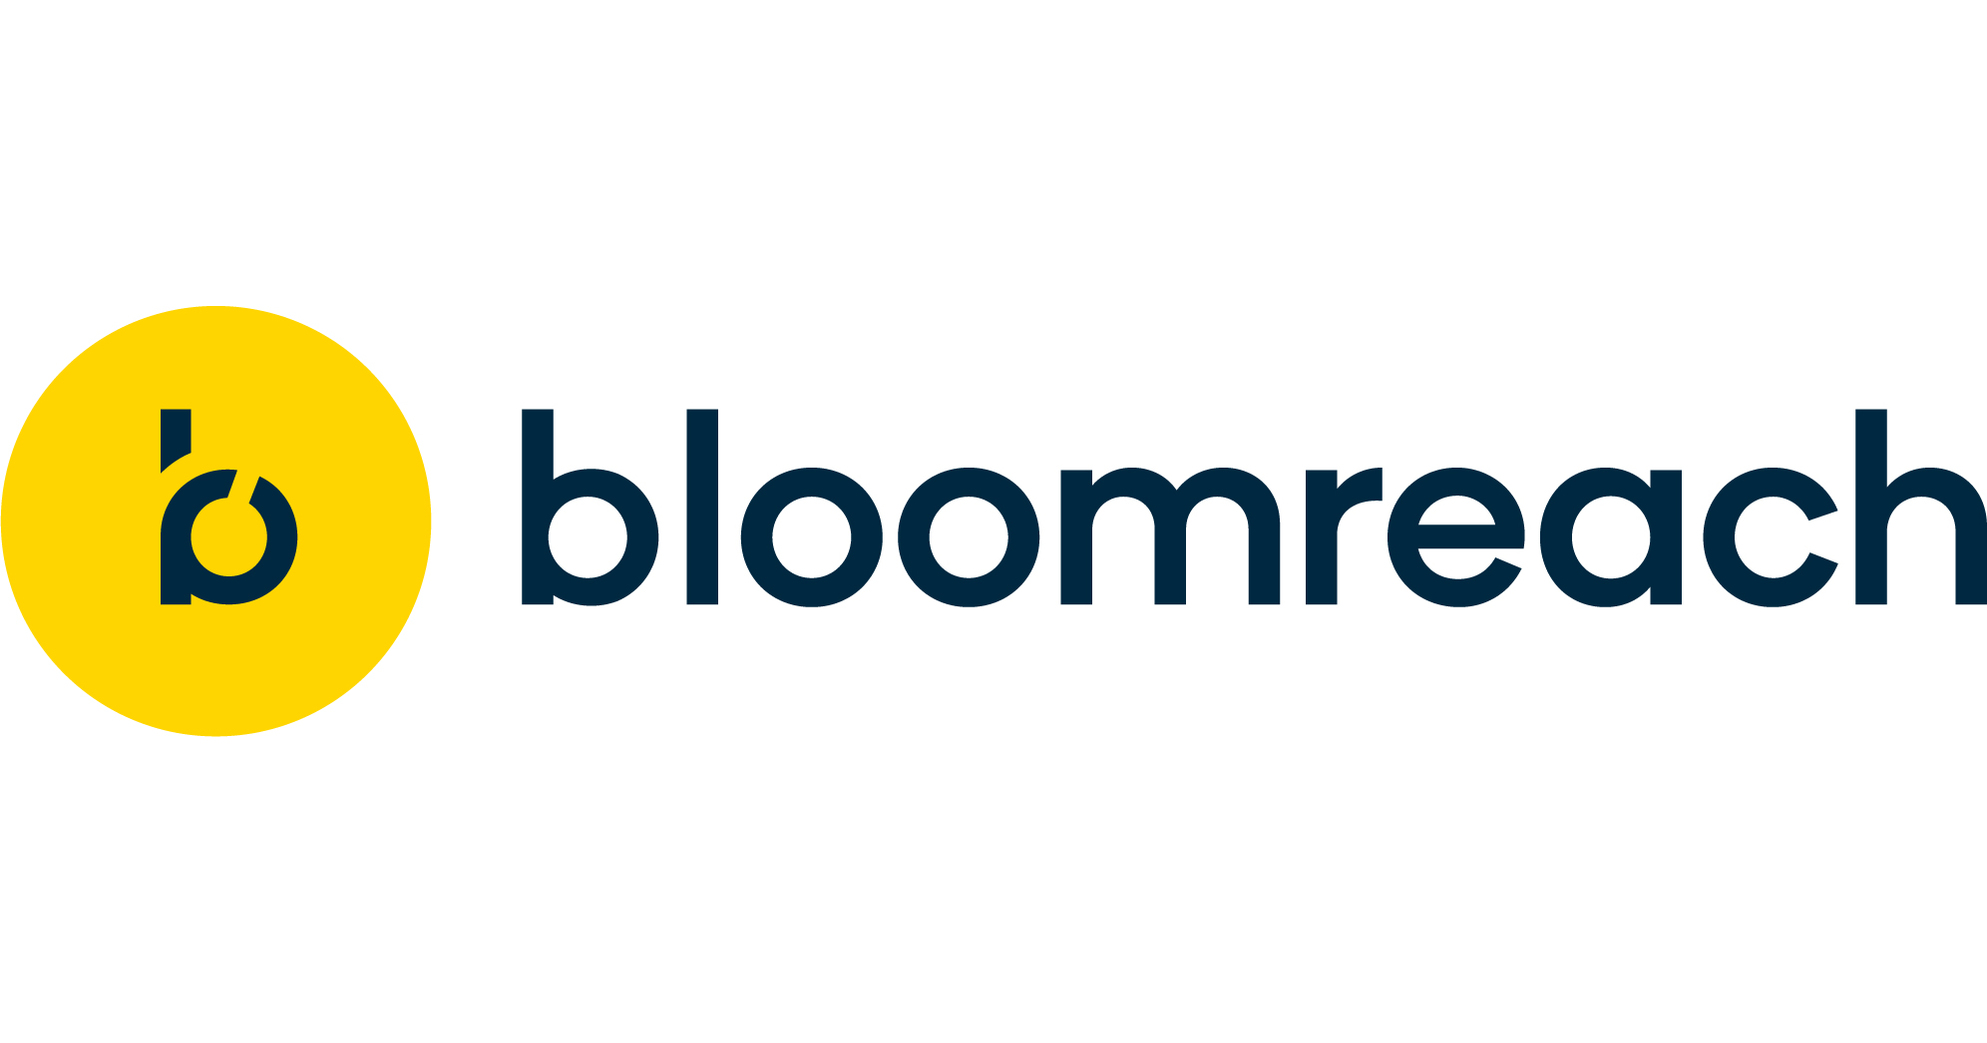 With the launch of its latest mobile app service for marketers, Bloomreach opens up a new channel of communication between brands and customers